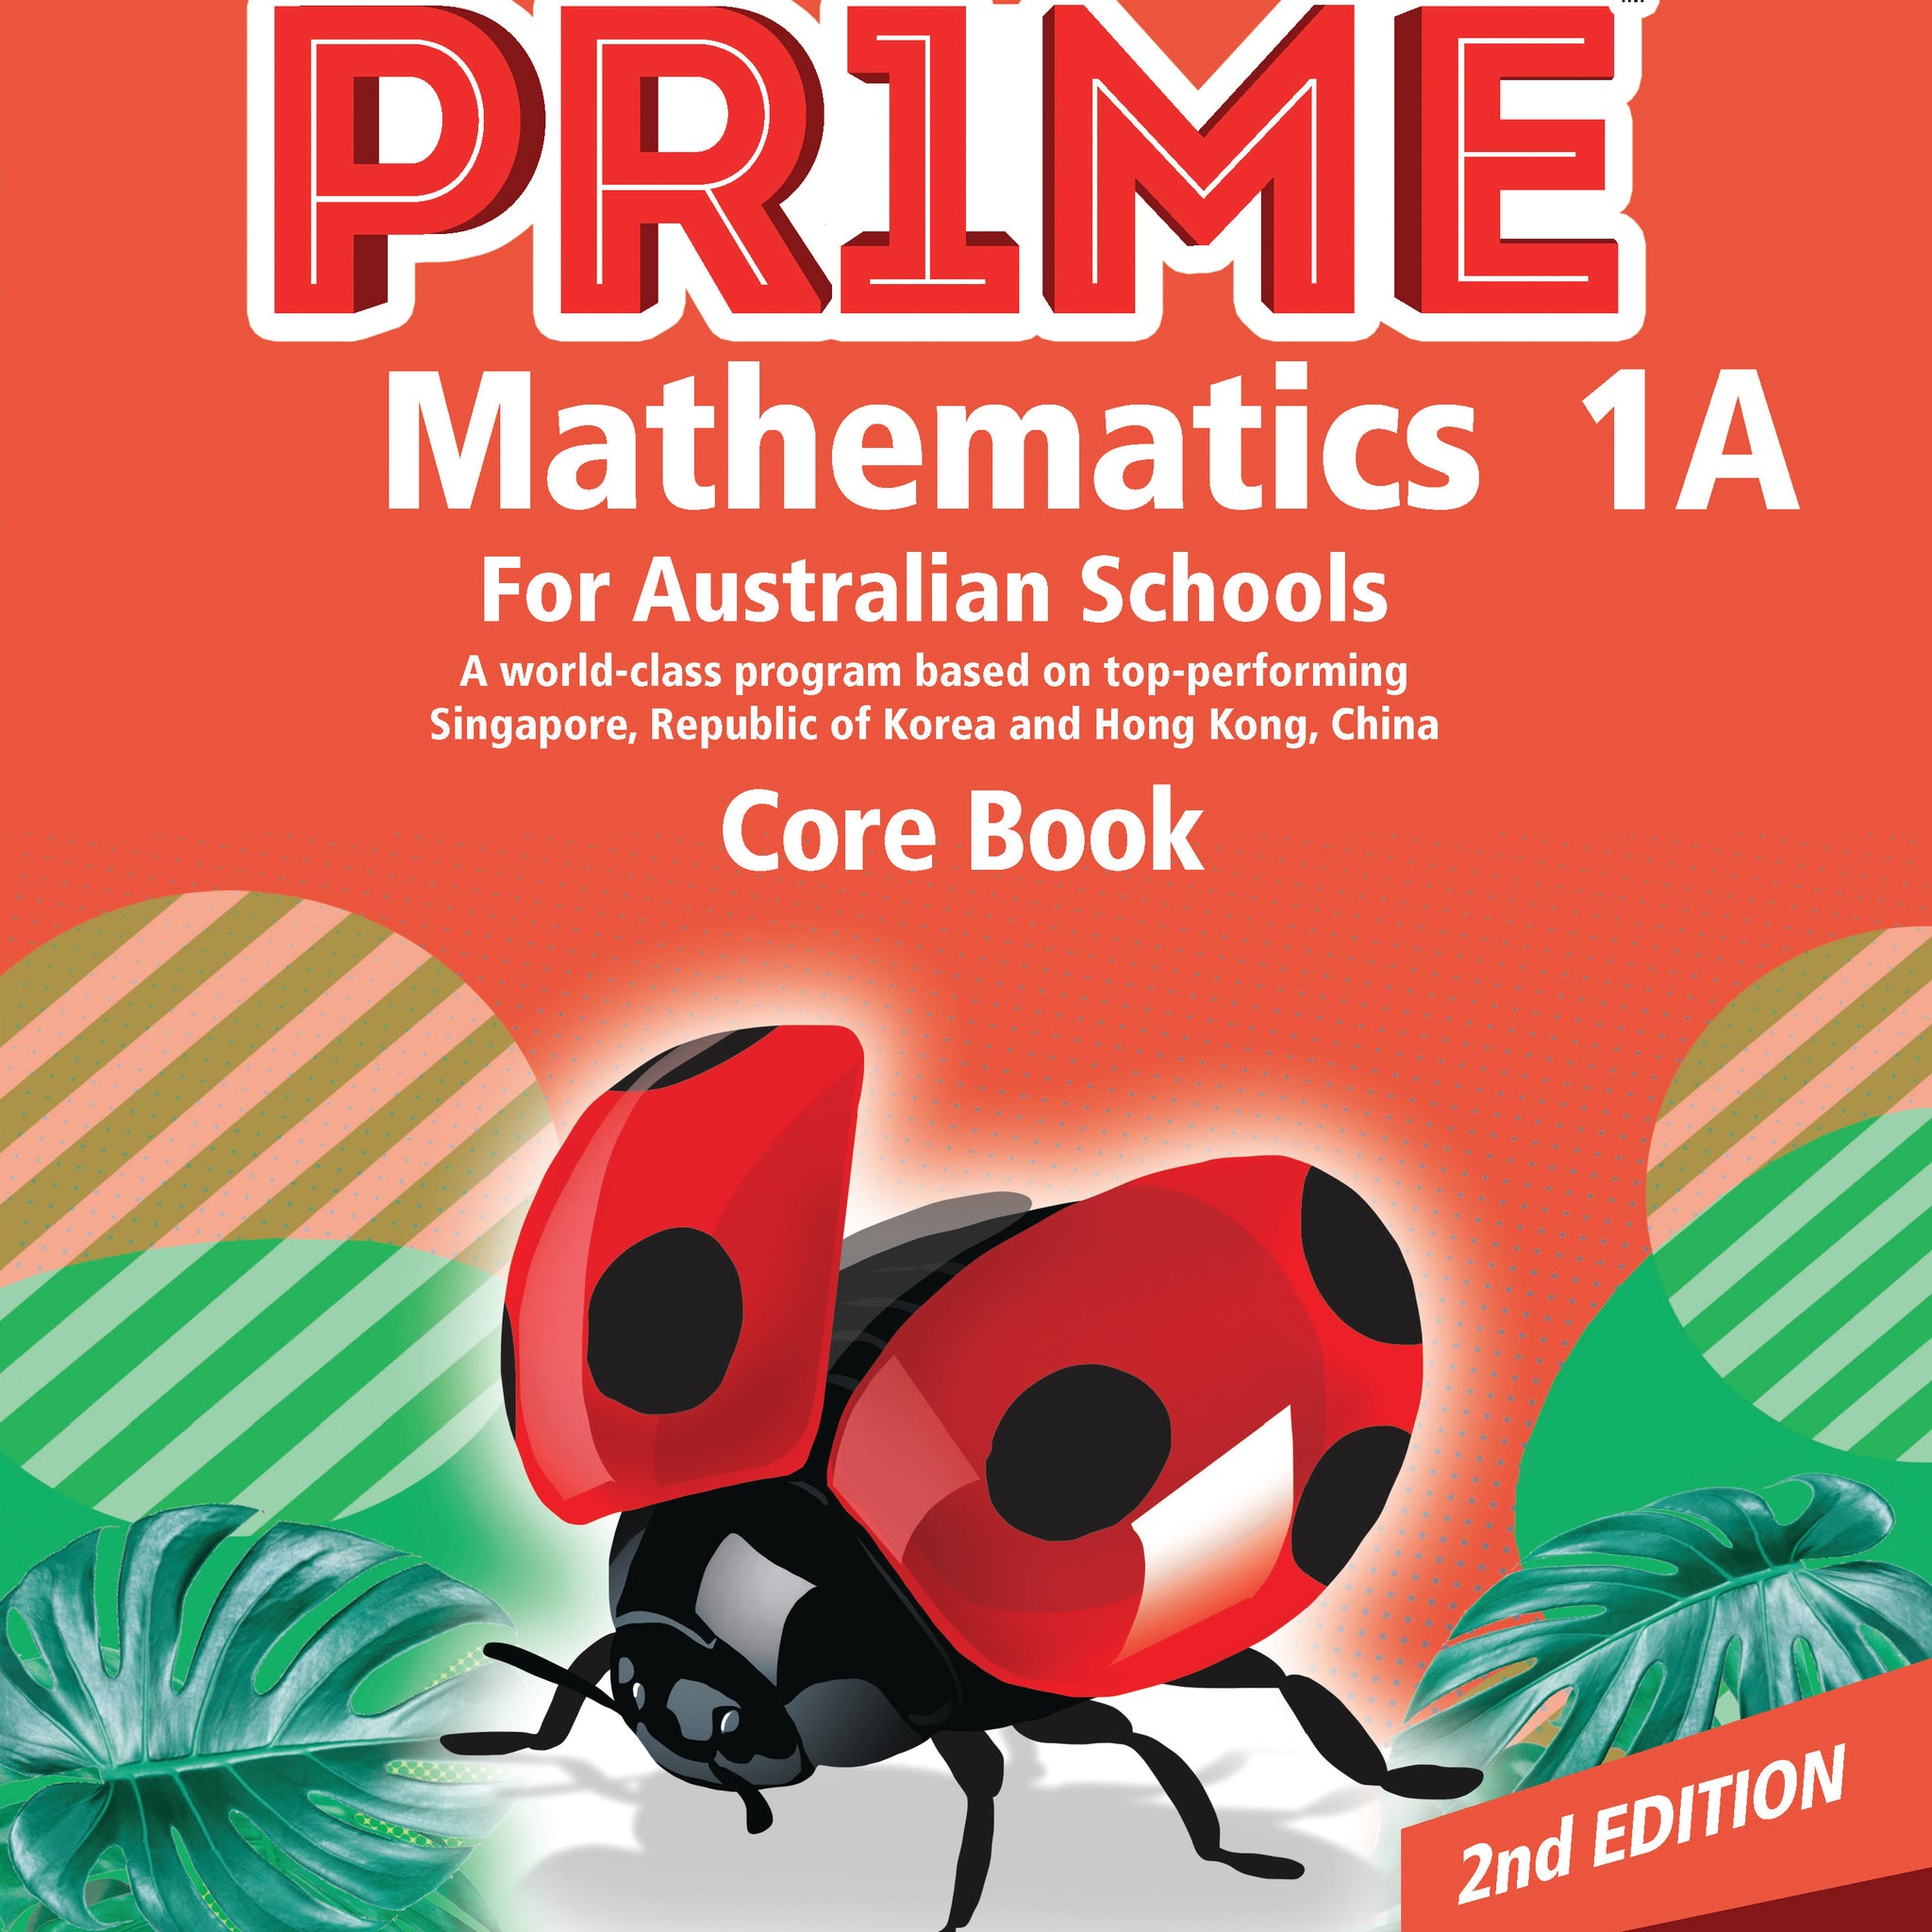 PRIME AUS Student Book 1A (2nd Edition)